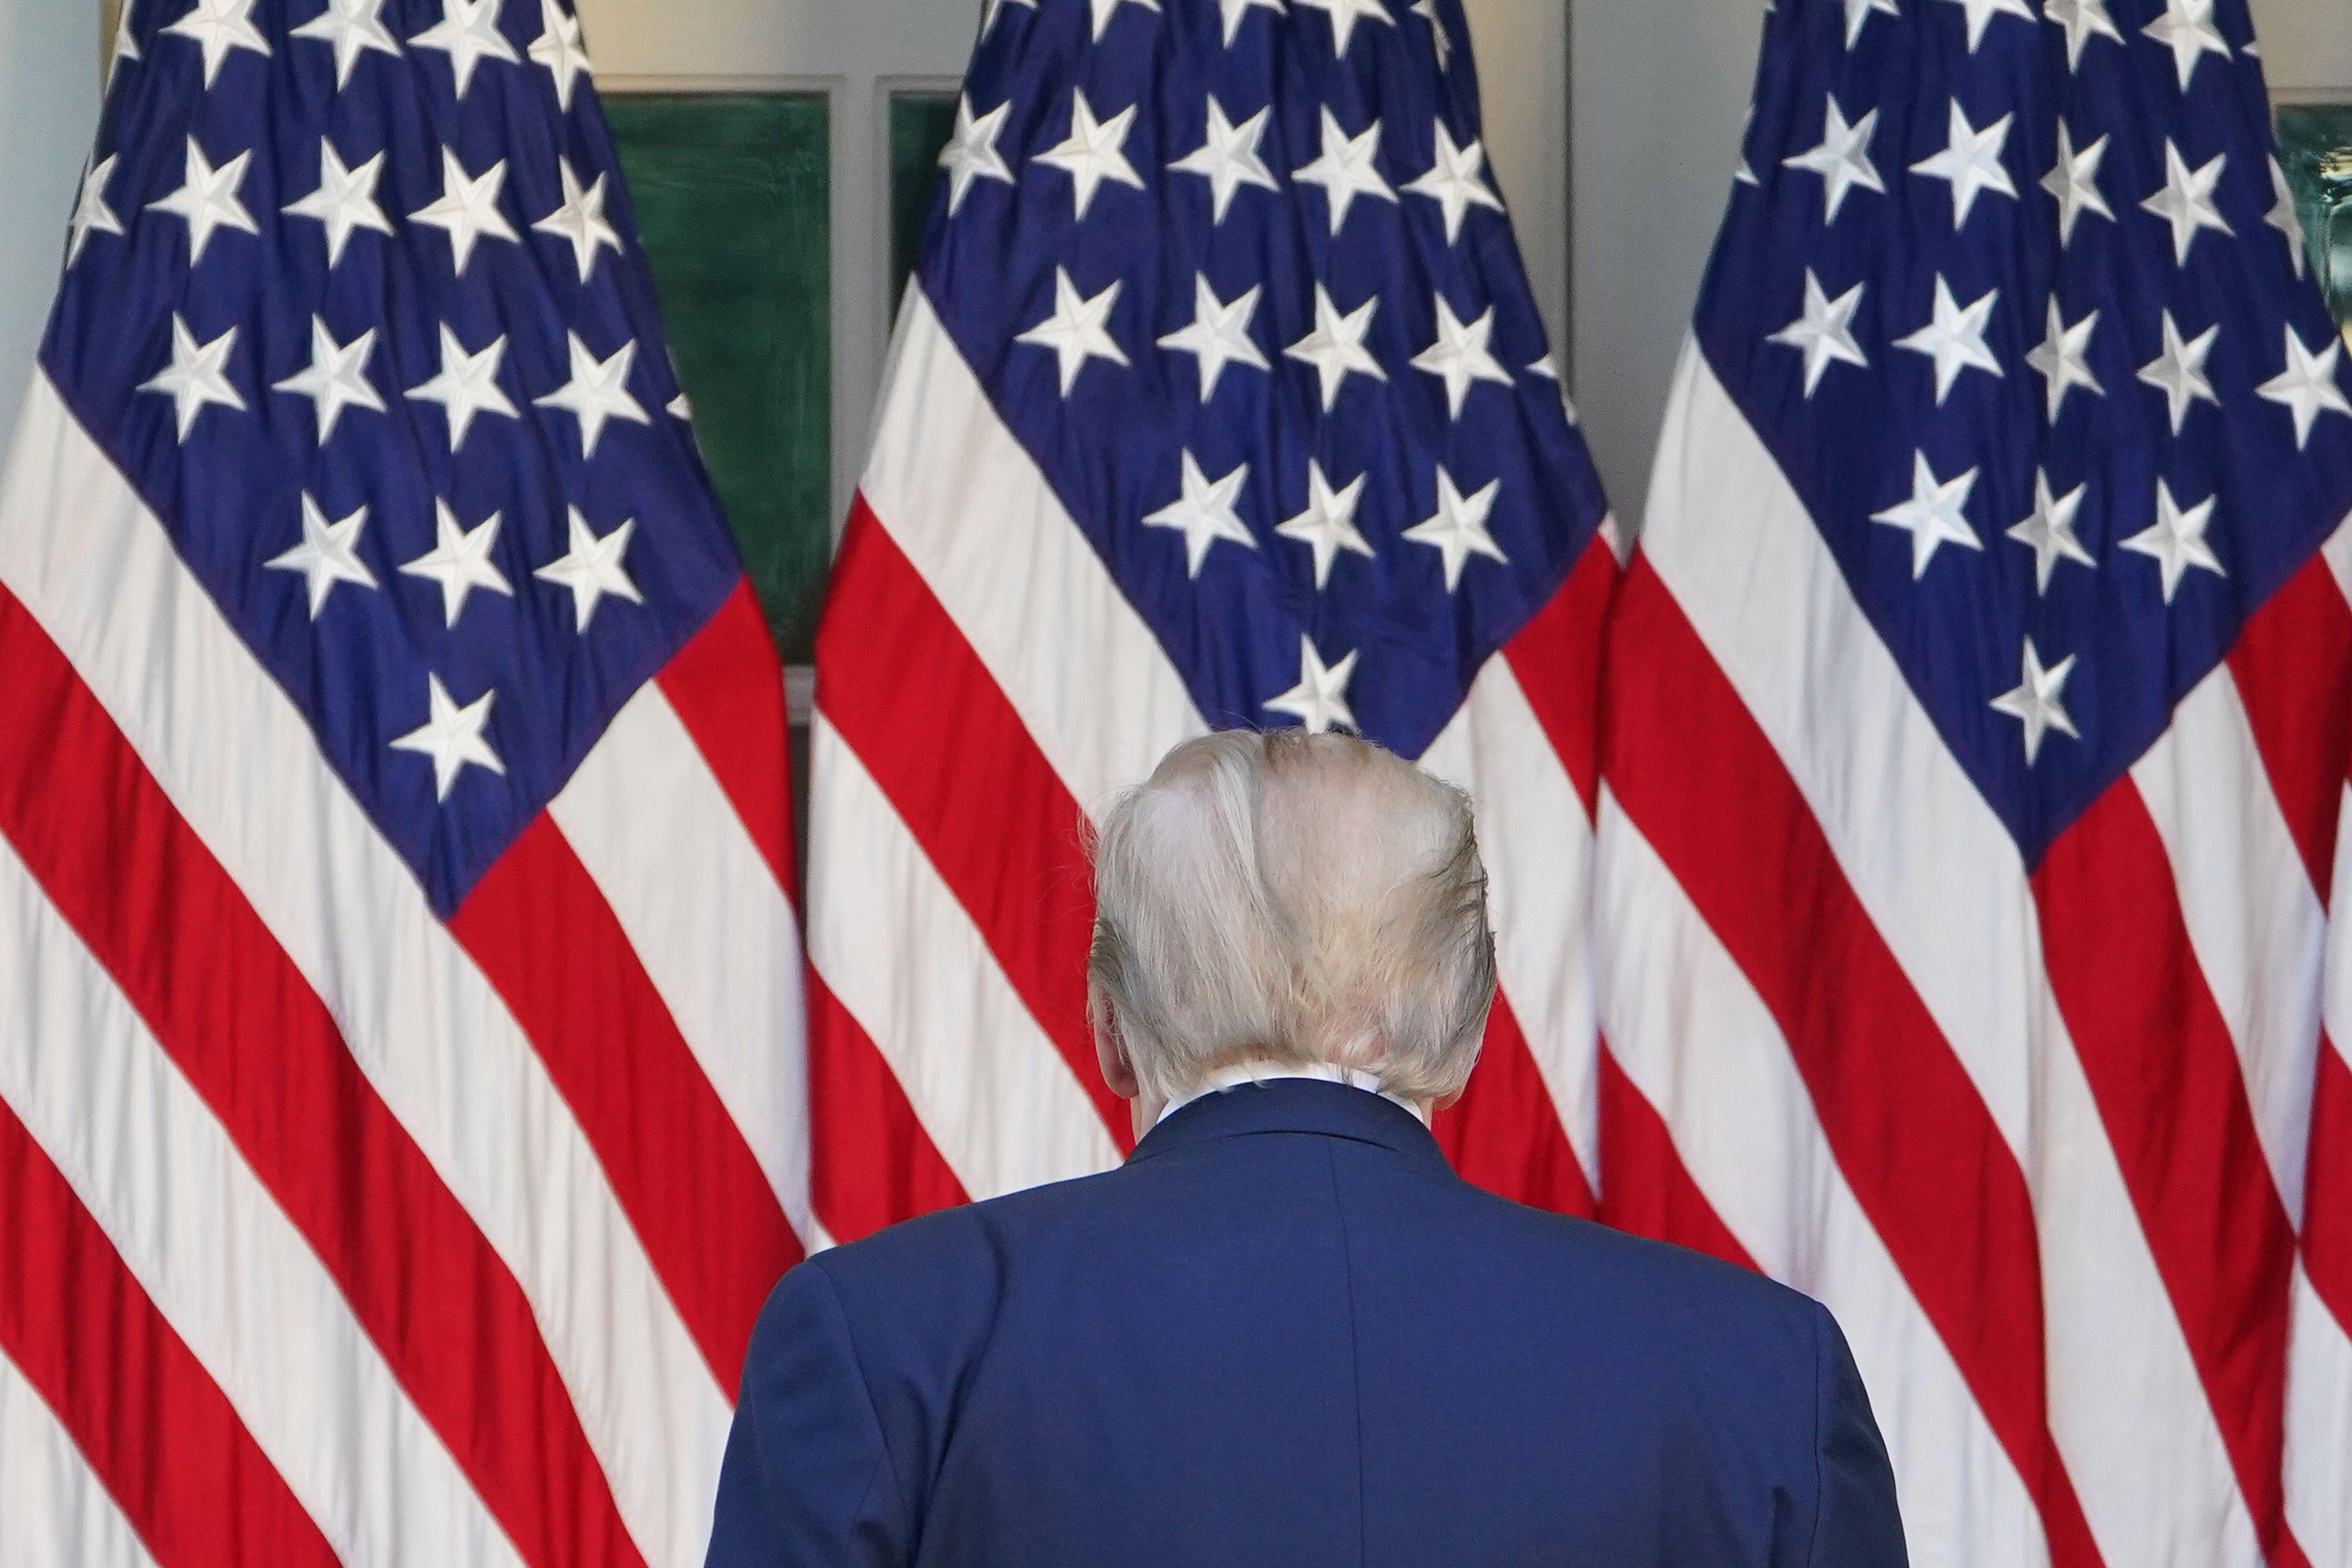 President Donald Trump's back is seen as he faces some American flags.